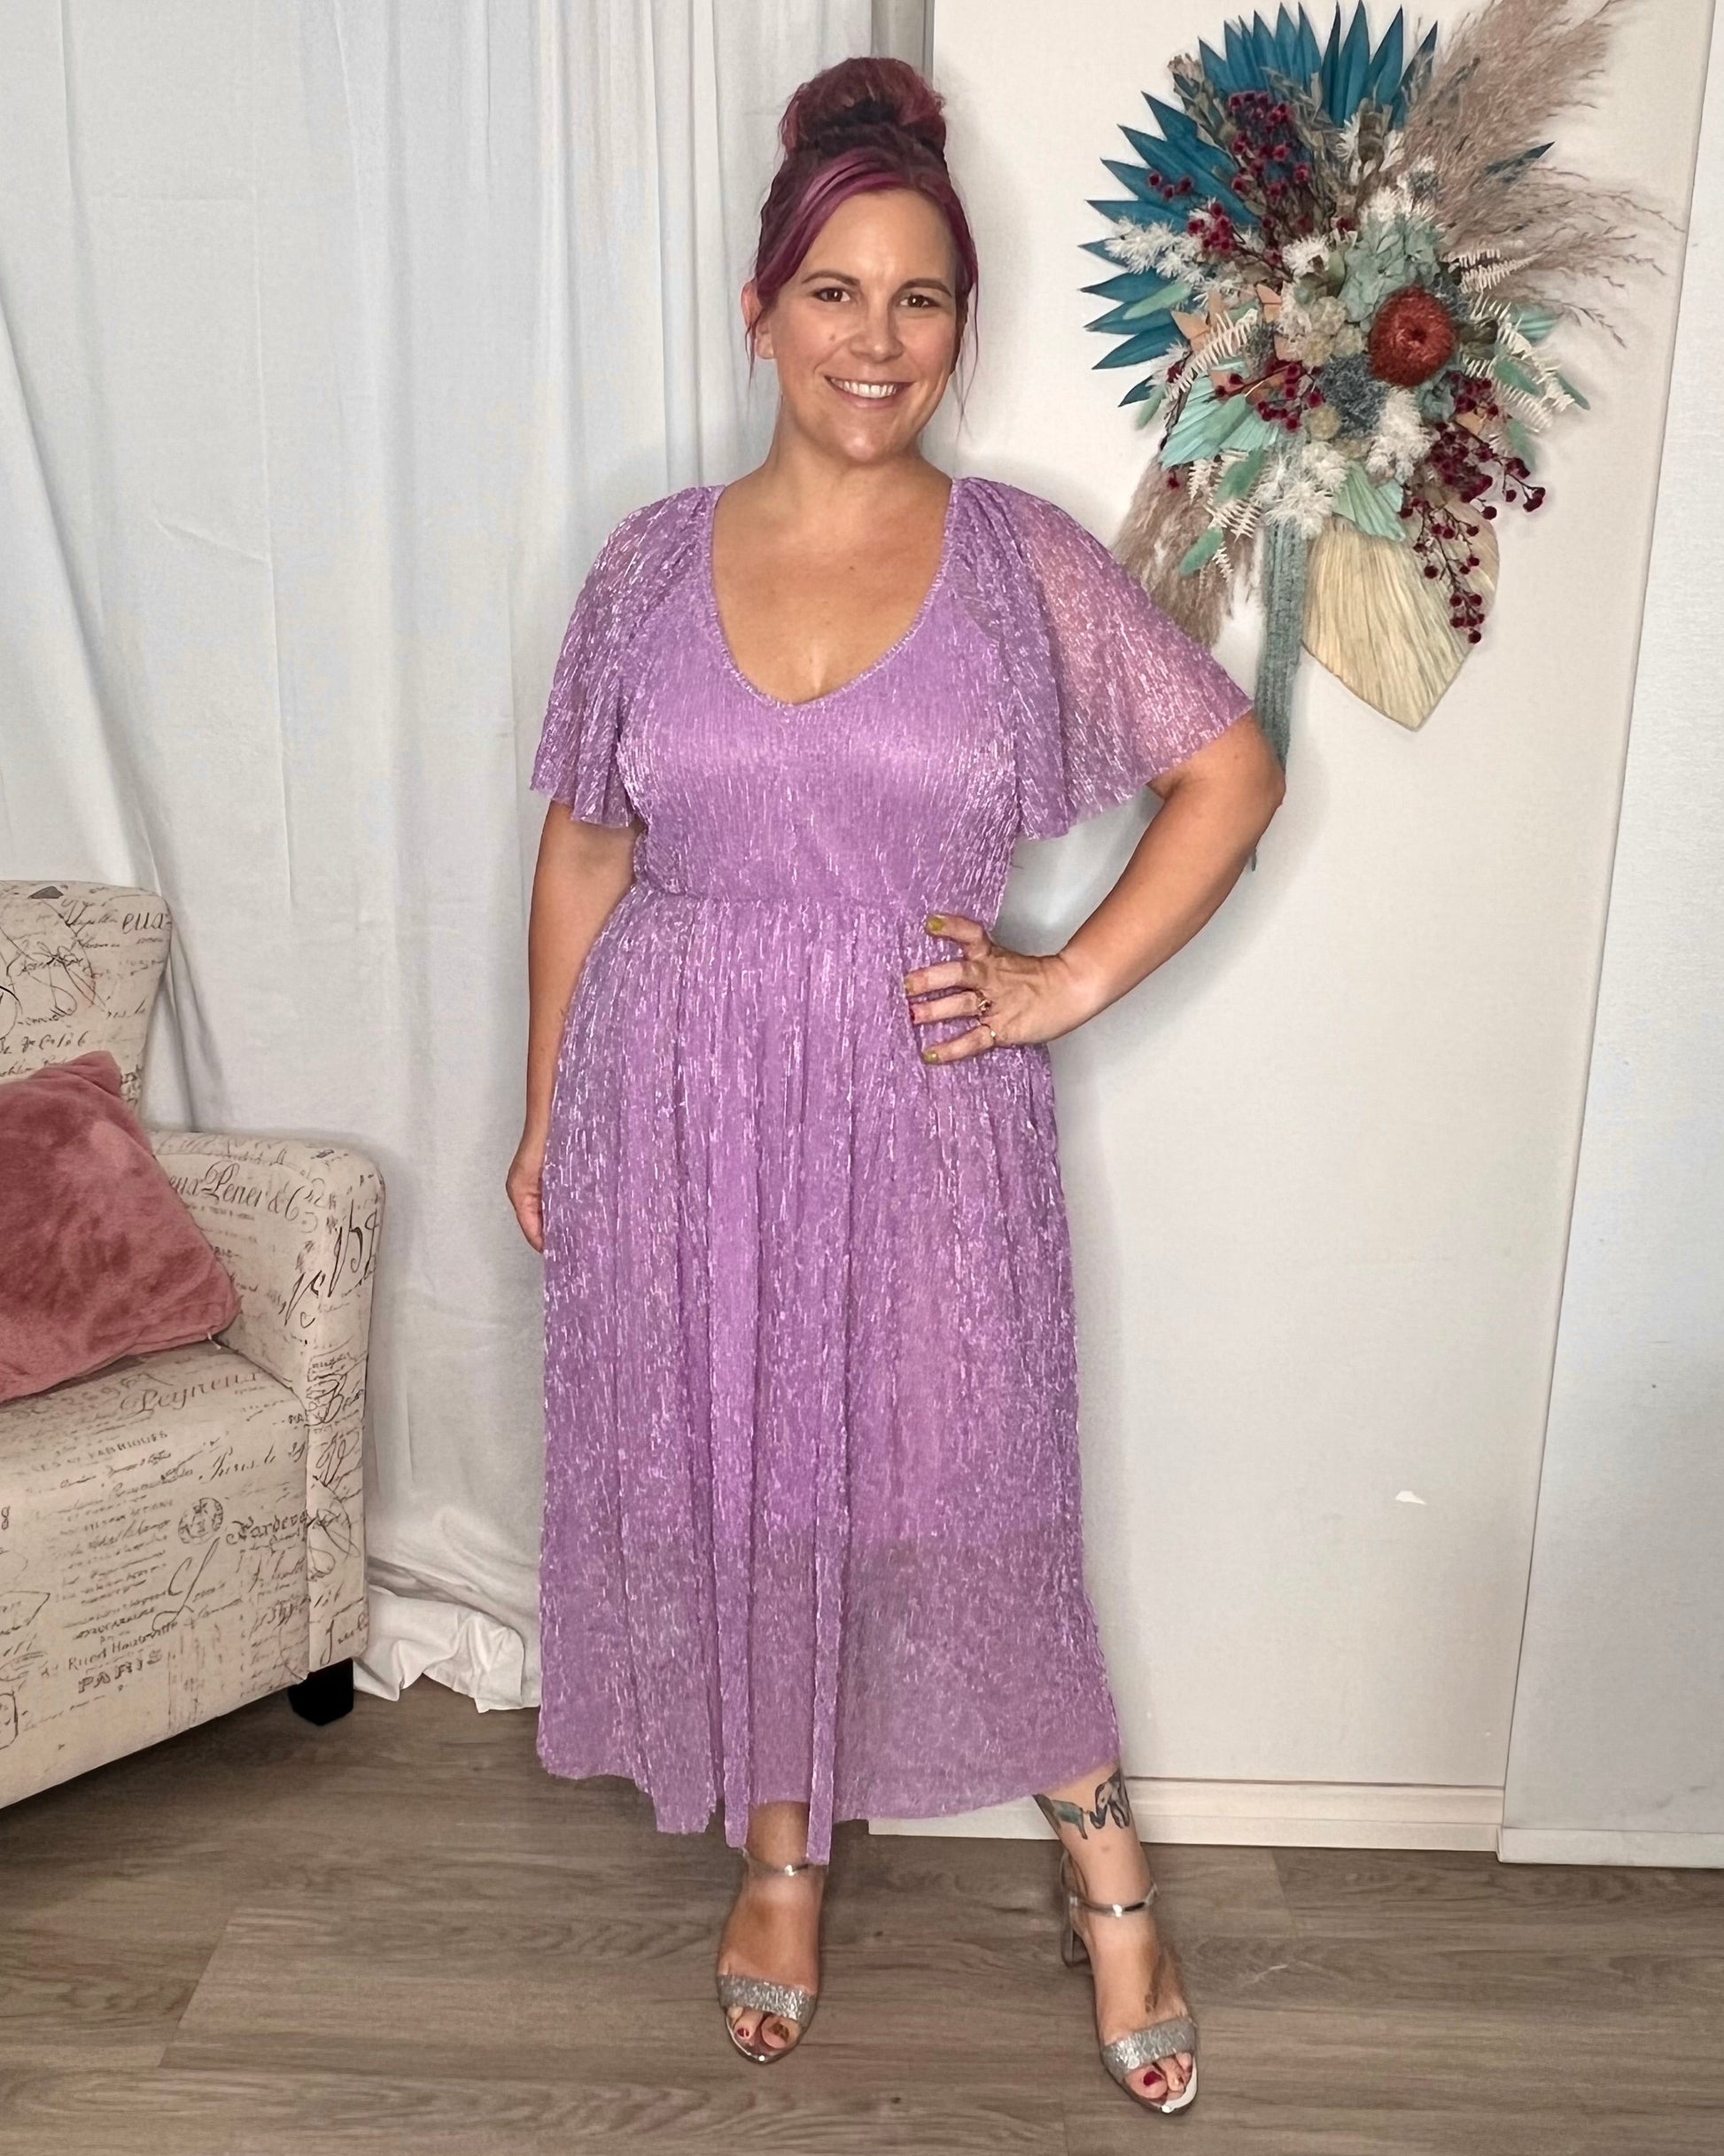 Nova Glitter Dress - Amethyst | Peach the Label | This limited edition Nova Dress is the perfect way to stand out at your next night out! Crafted from 100% Polyester and designed with a splash of sparkle, this dress